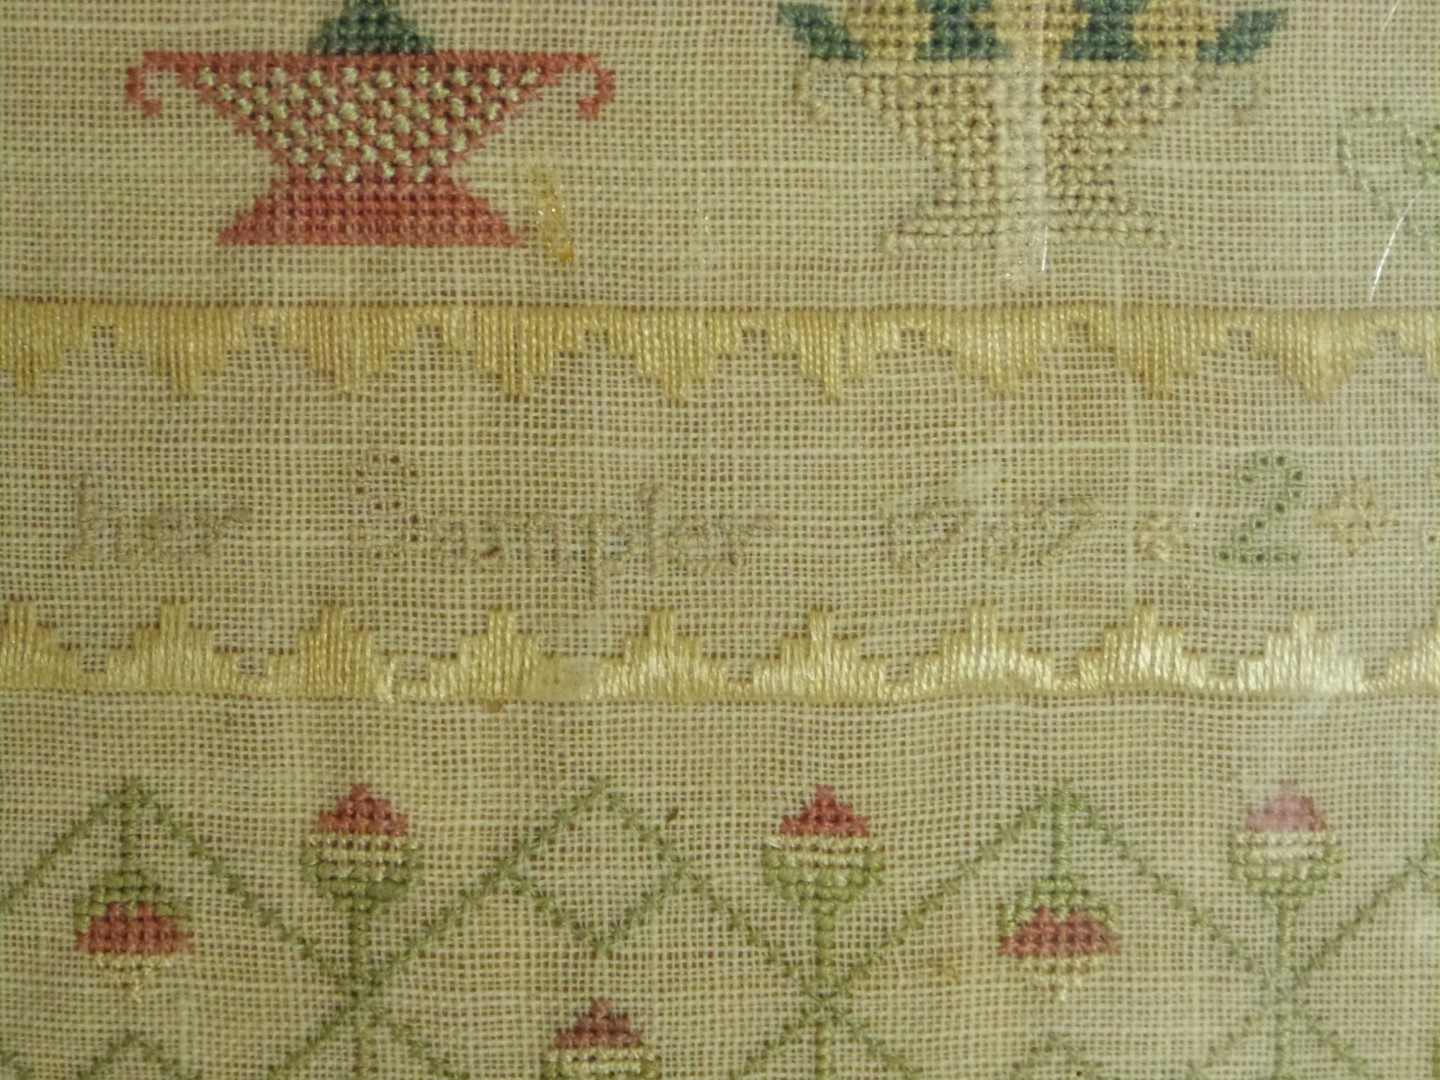 George II embroidery sampler by Molly Cooper 1767, 31 x 26cm - Image 3 of 3